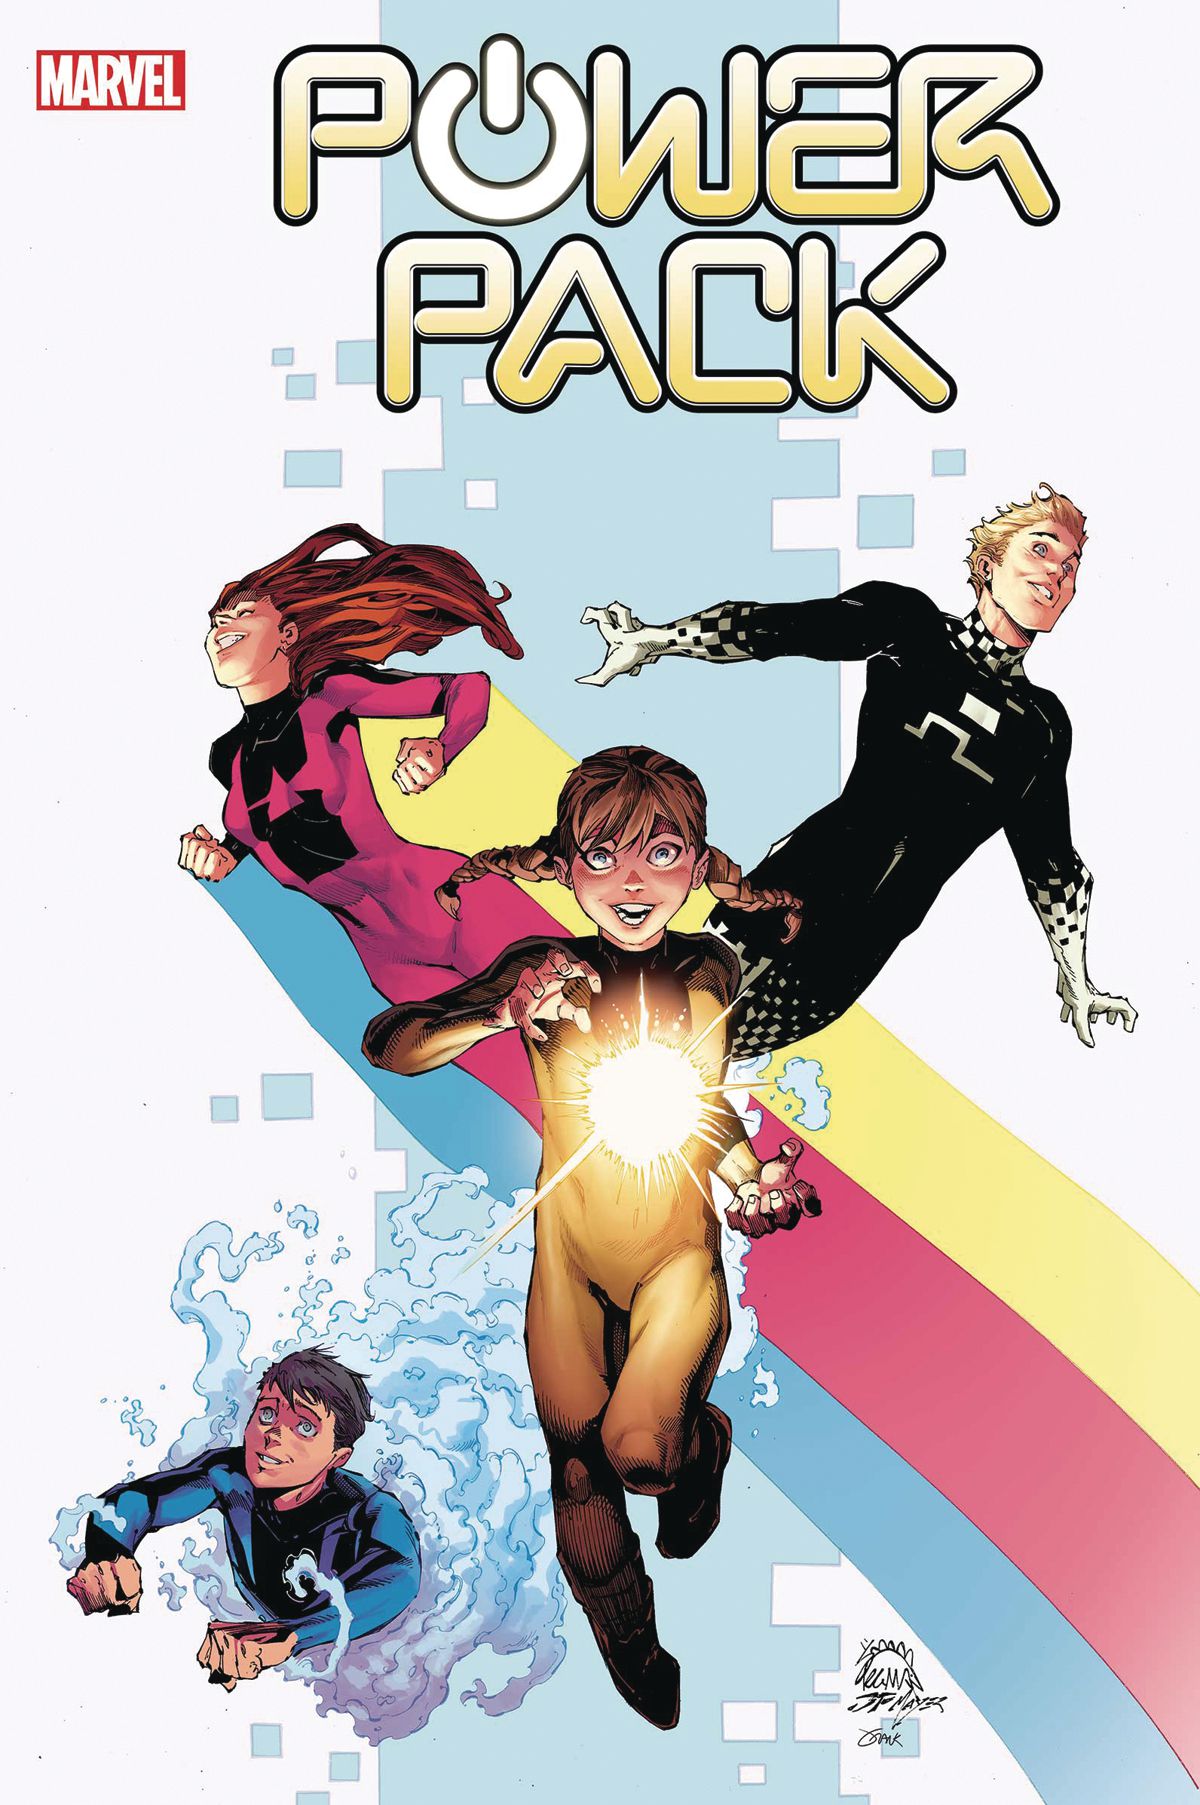 Katie, Julie, Jack and Alex Power on the cover of Power Pack #1, Marvel Comics (2020). 